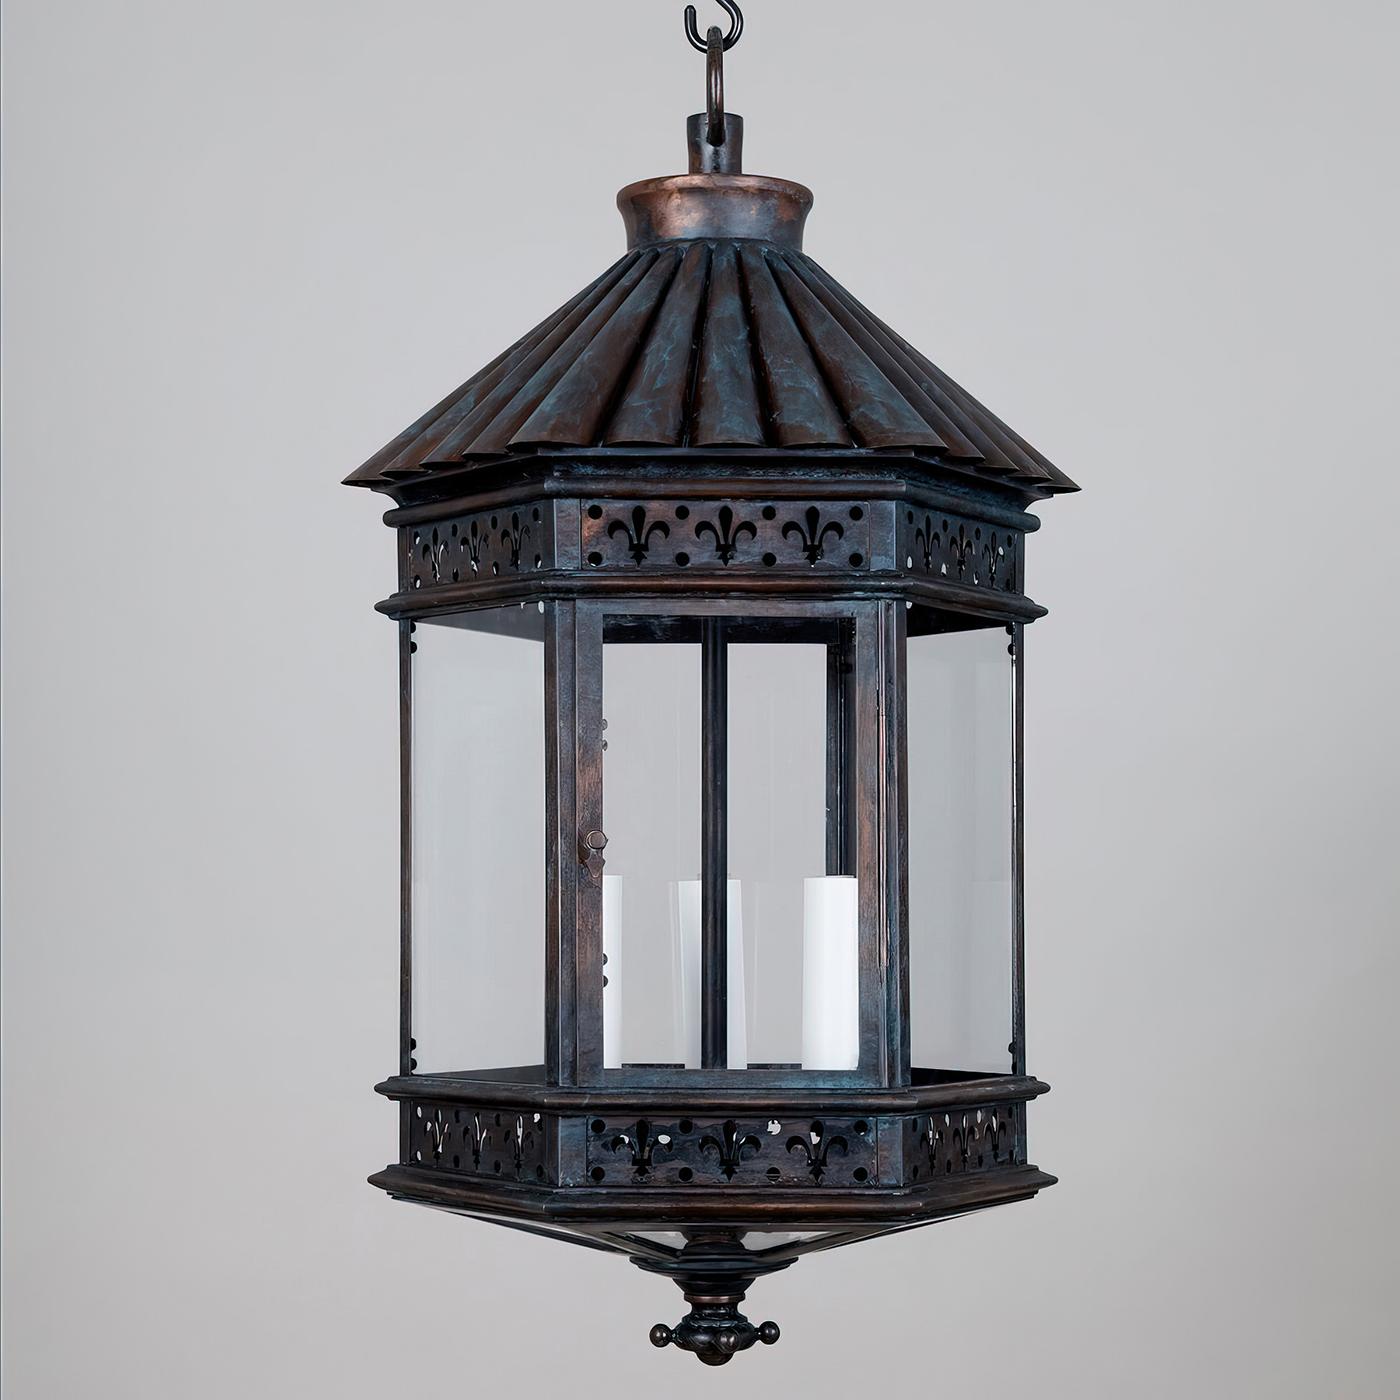 French Country Lantern, This hexagonal lantern has a fluted lotus roof, fleur de lis reticulated panel sides, glass sides and door with three lights.

The copper bronze finish adds to the elegance of the lantern. UL Listed for wet locations.